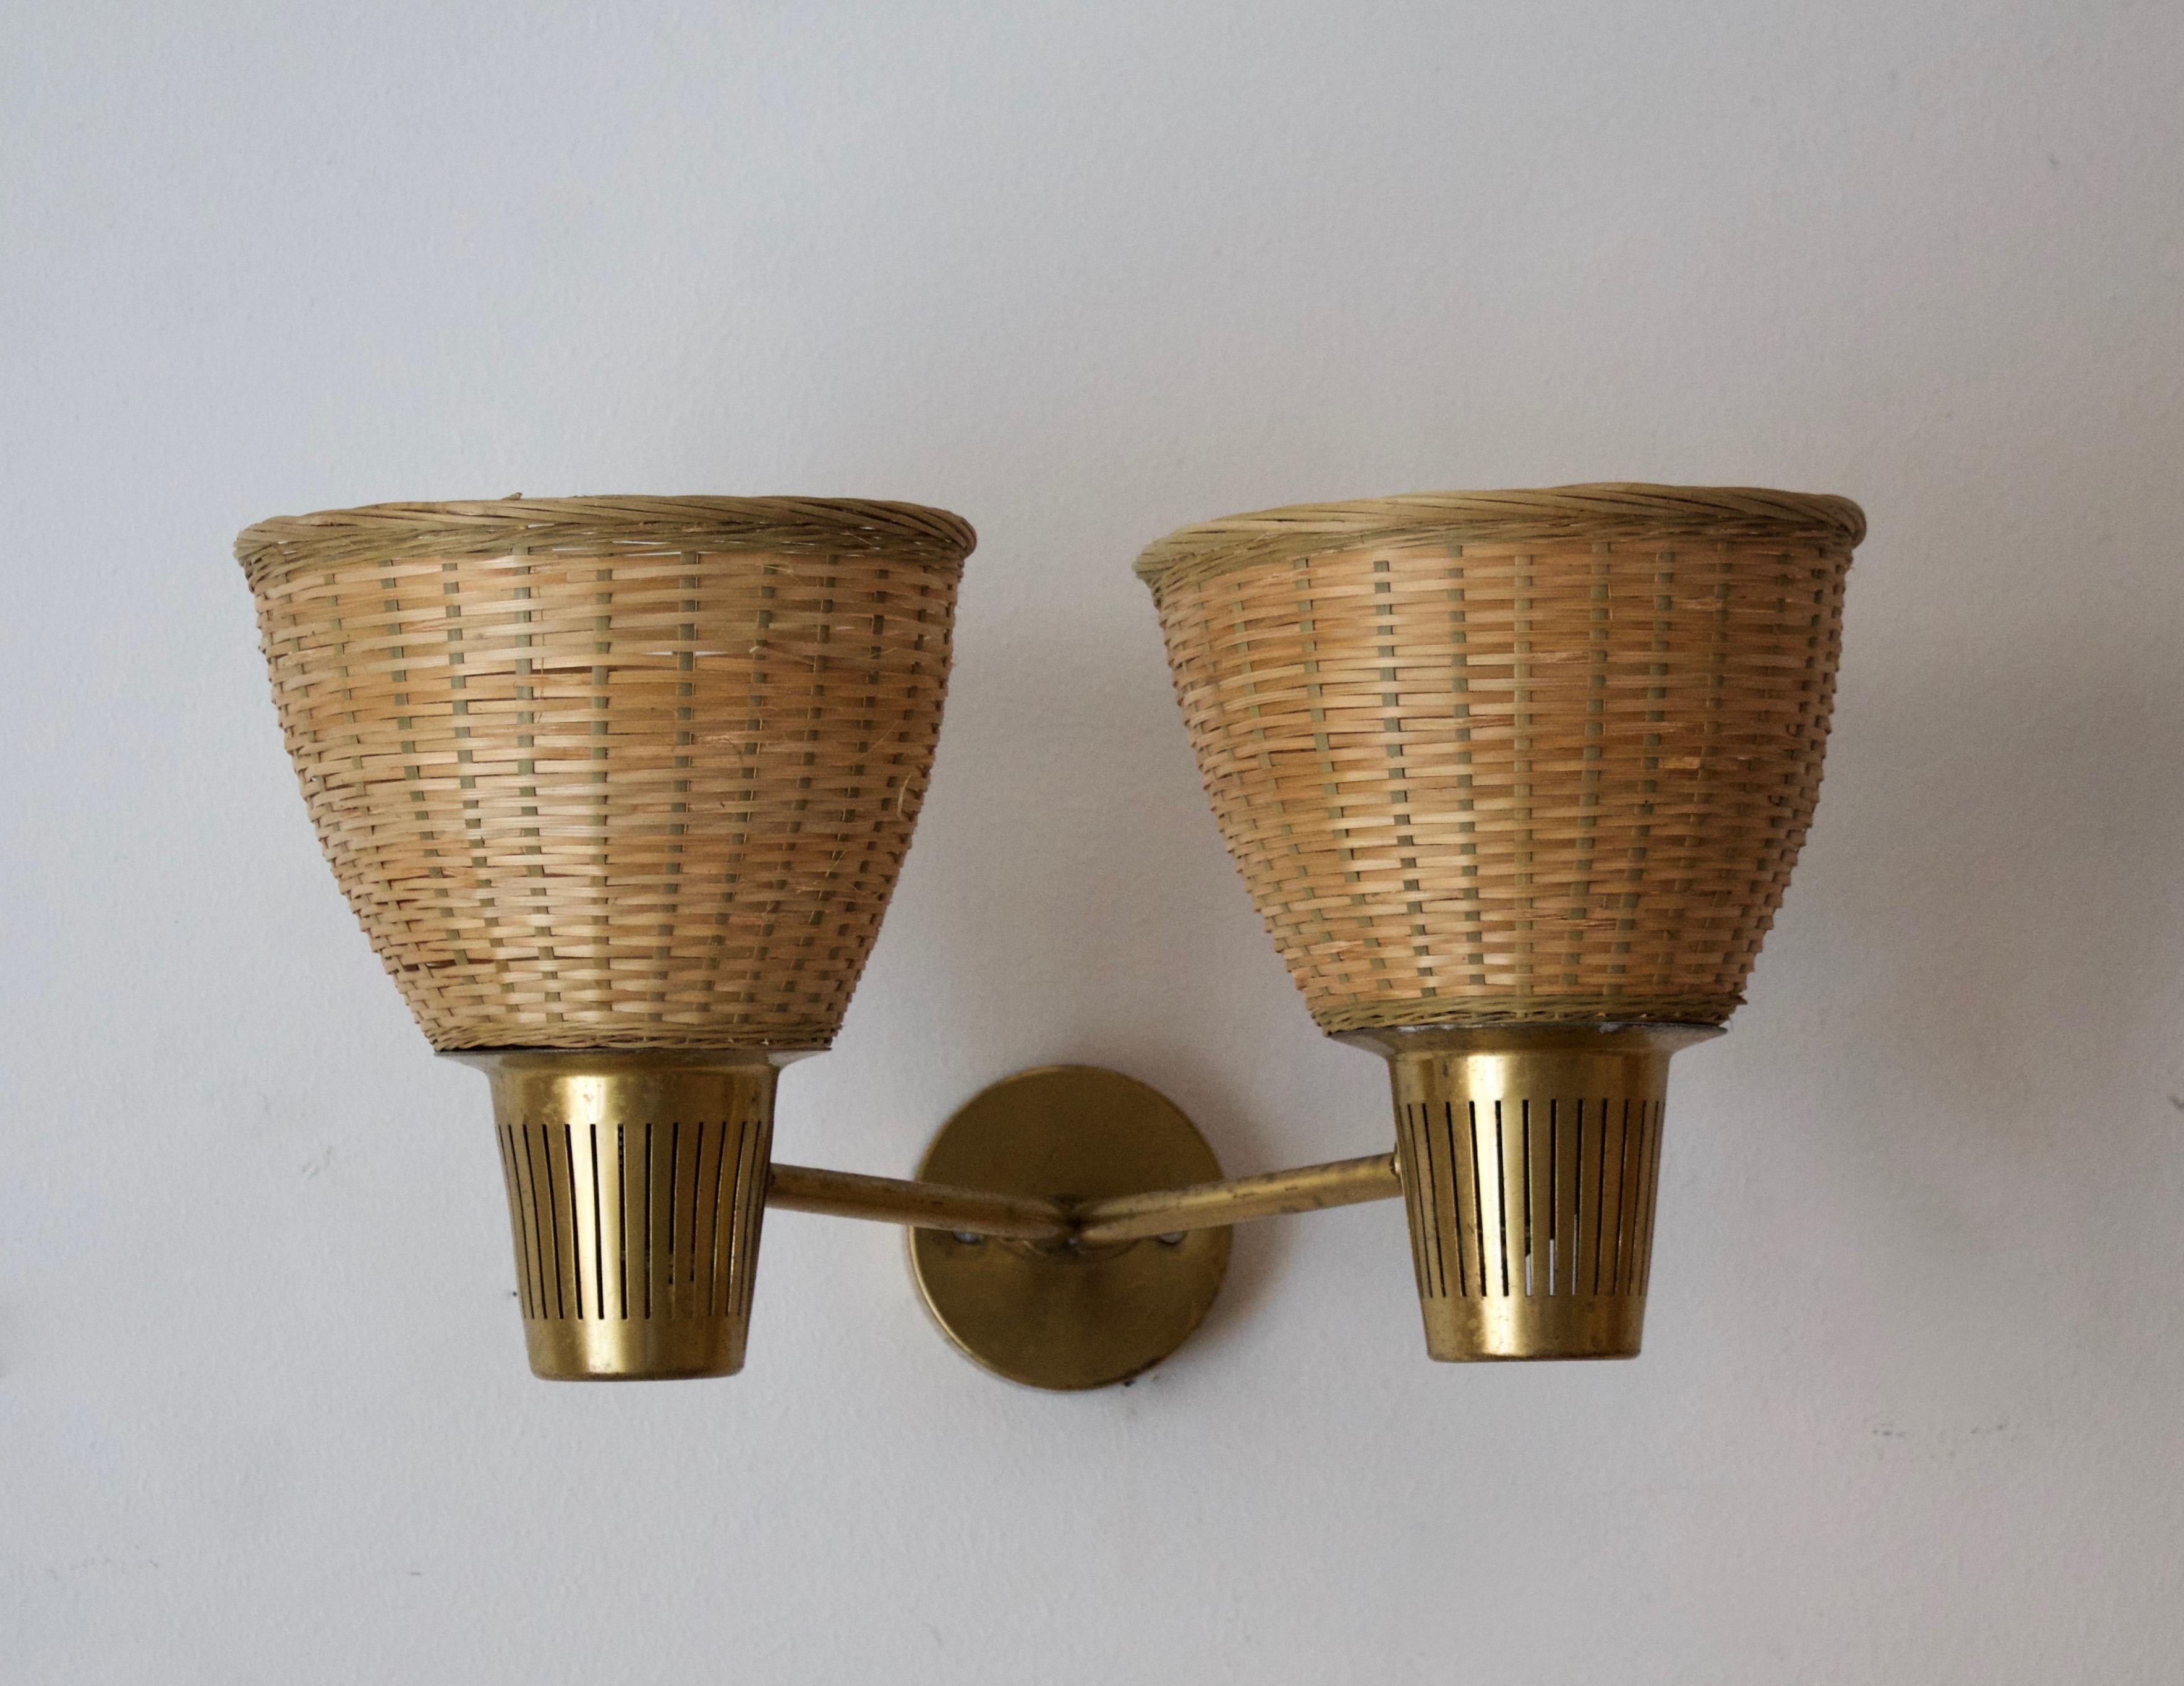 A two-armed wall light / sconce produced by Swedish Ateljé Lyktan, designed by Hans Bergström. Produced in brass, assorted vintage rattan lampshades.

Other Nordic lighting designers include Paavo Tynell, Hans-Agne Jacobson, Carl-Axel Acking, and